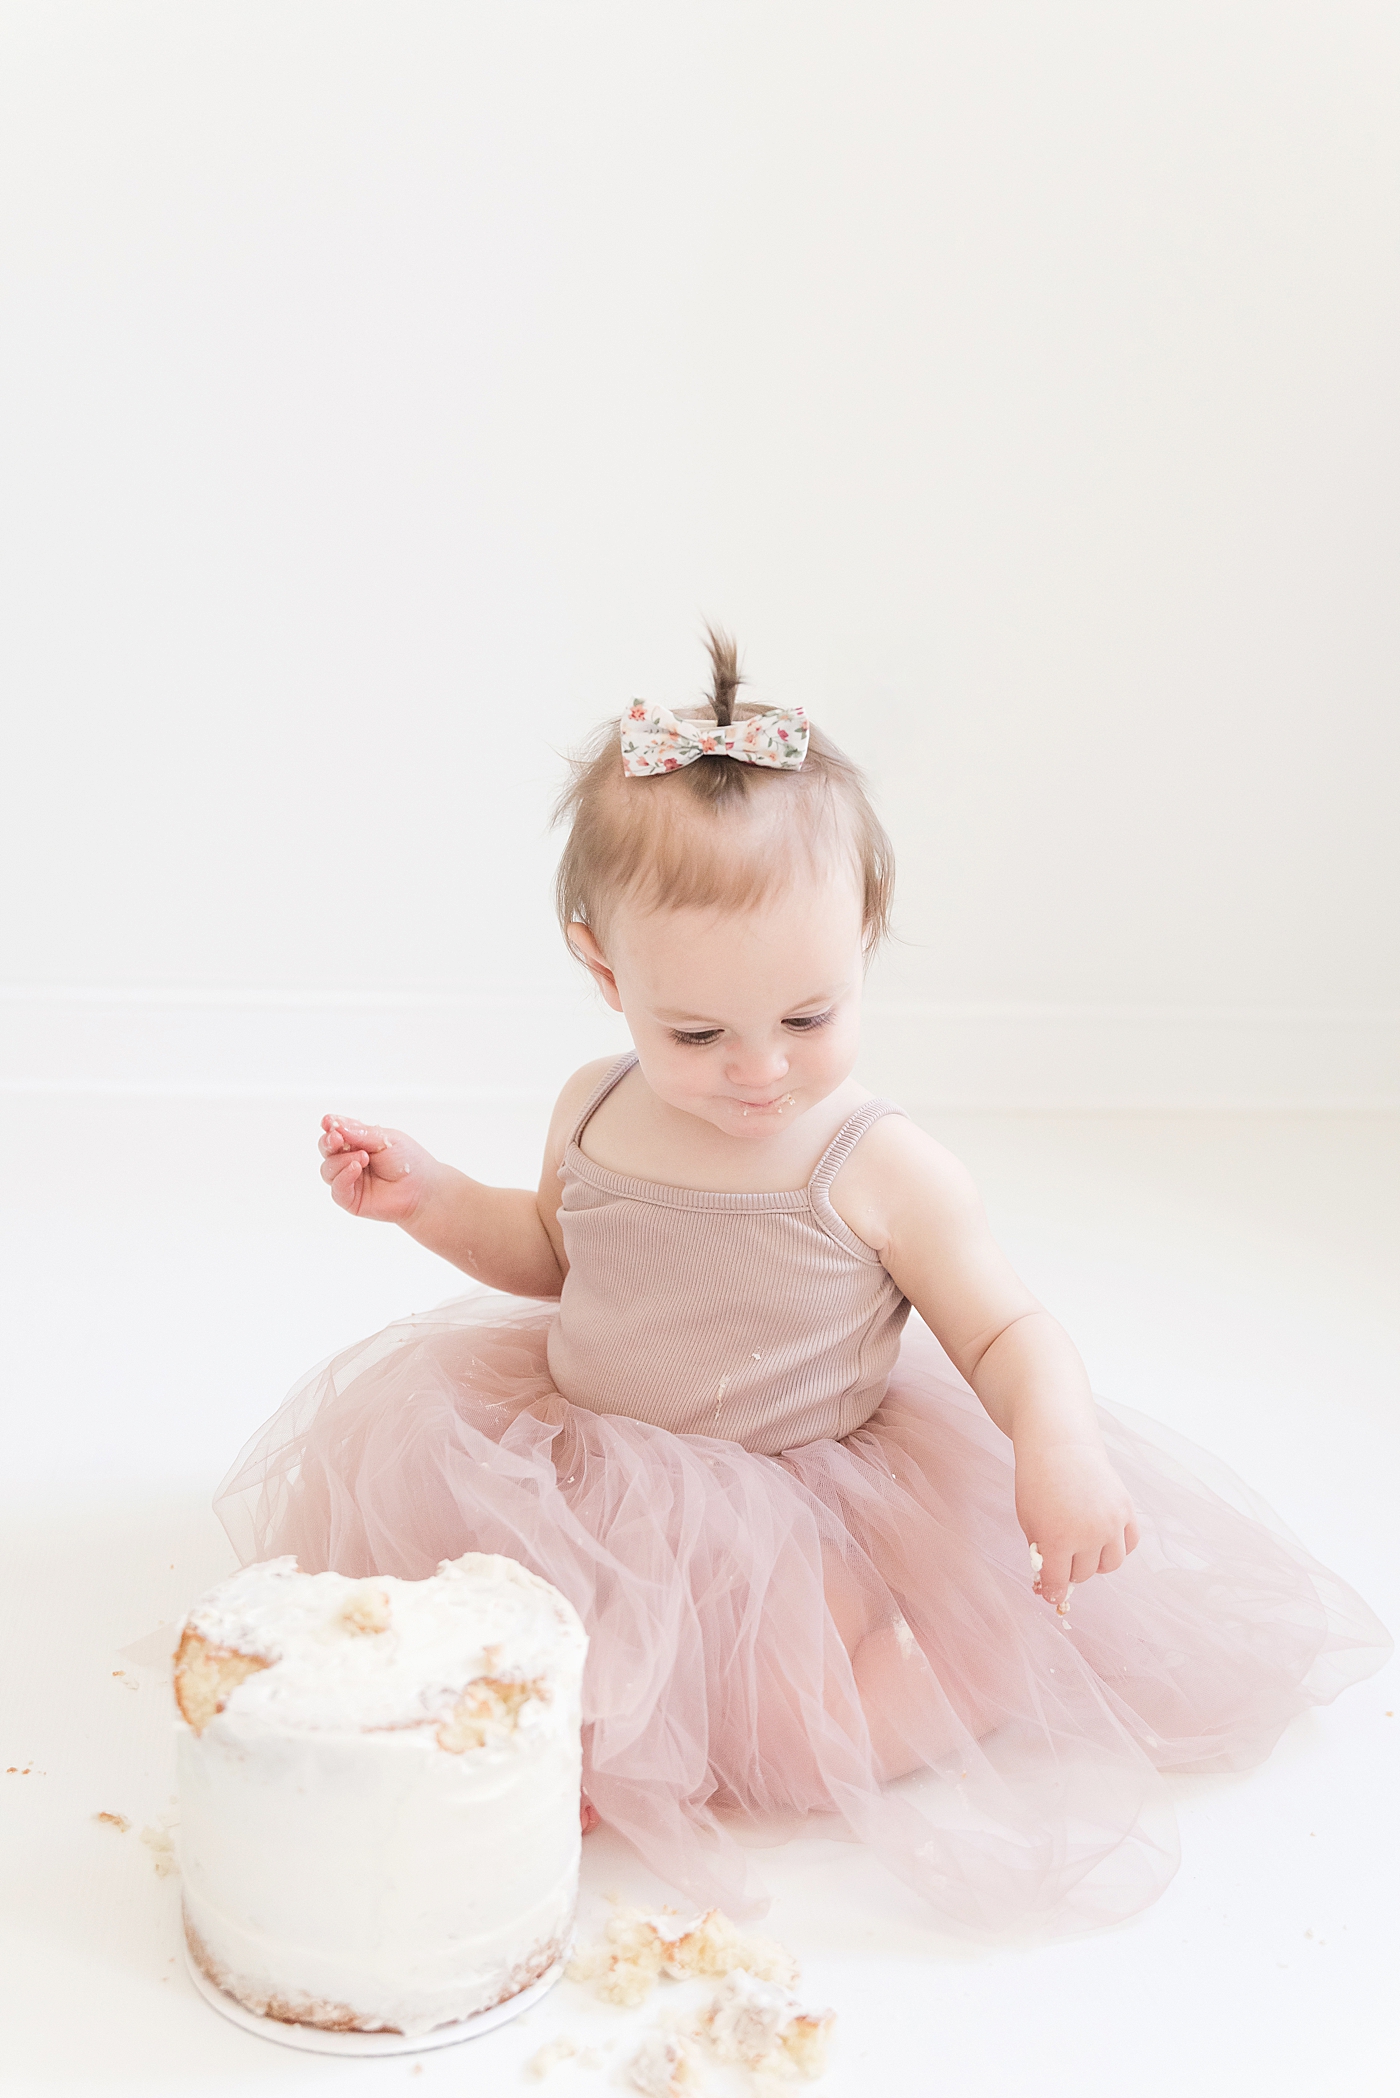 Baby girl in pink tutu with smash cake | Baby photographer in Charlotte Anna Wisjo